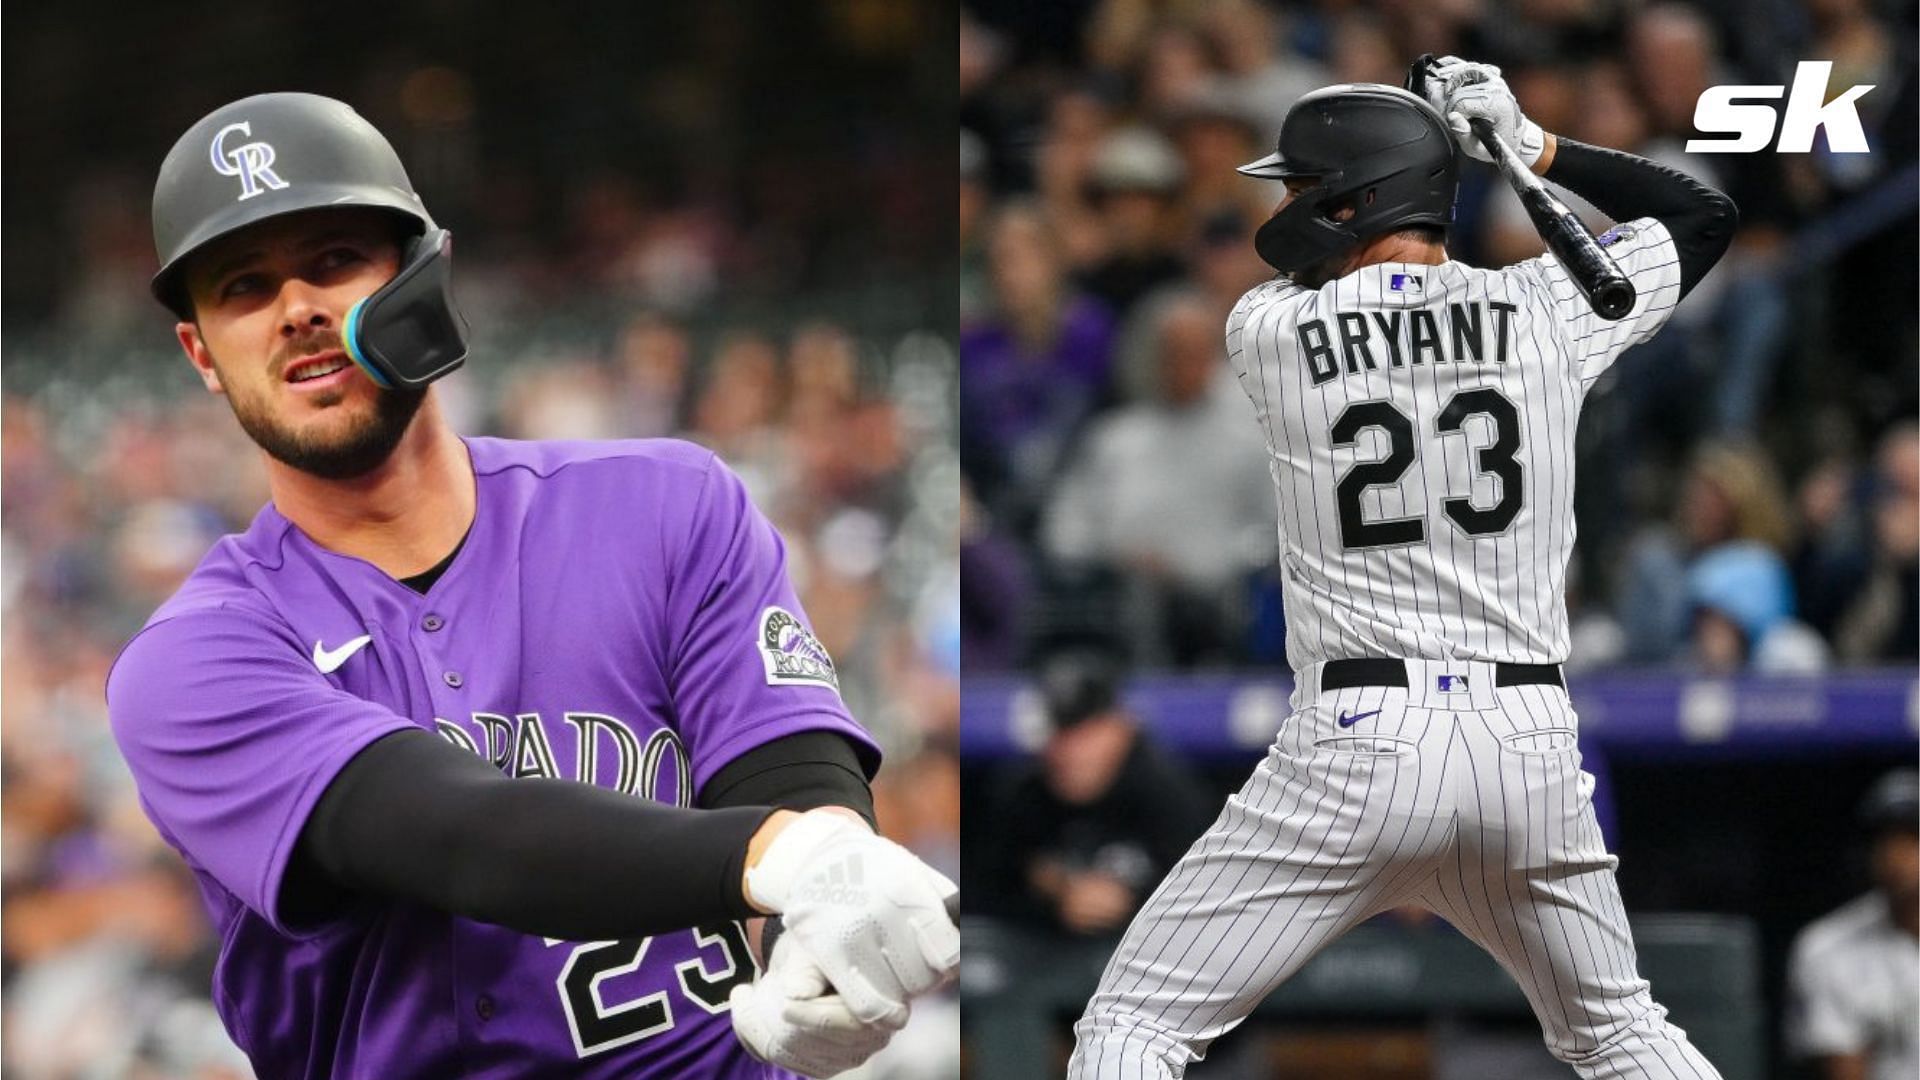 Kris Bryant ejection: Why was Kris Bryant ejected? Rockies